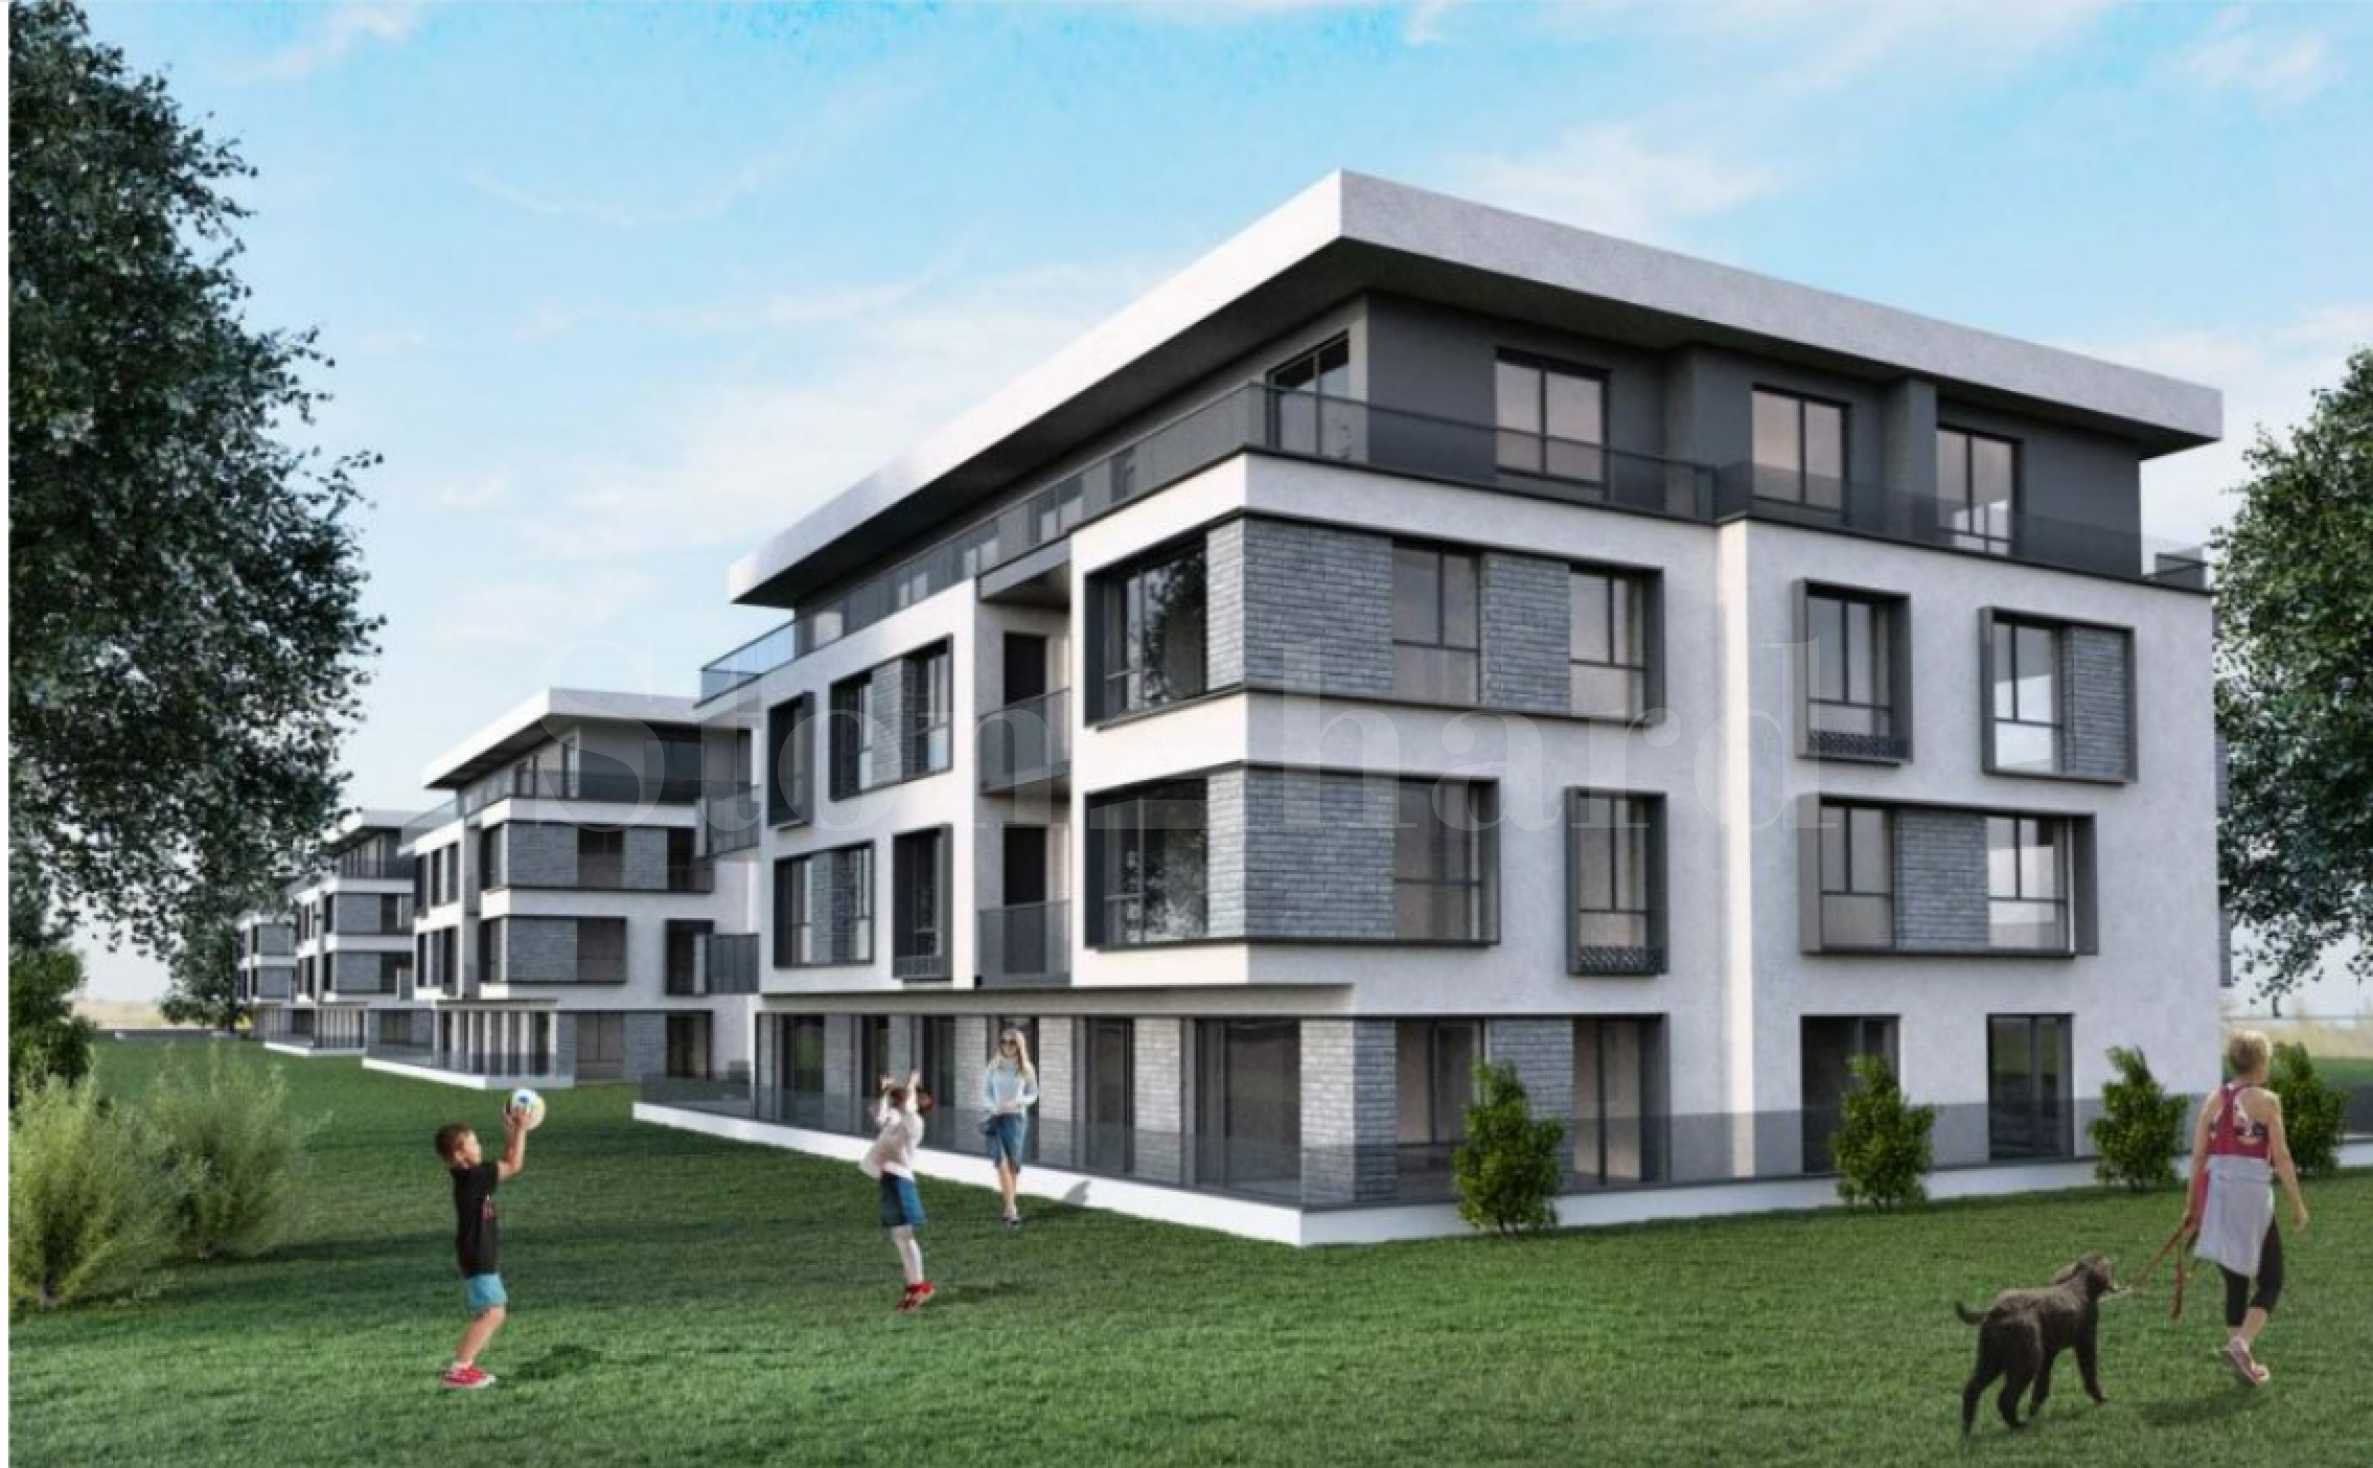 New apartments in a modern complex with park environment near the rowing base1 - Stonehard